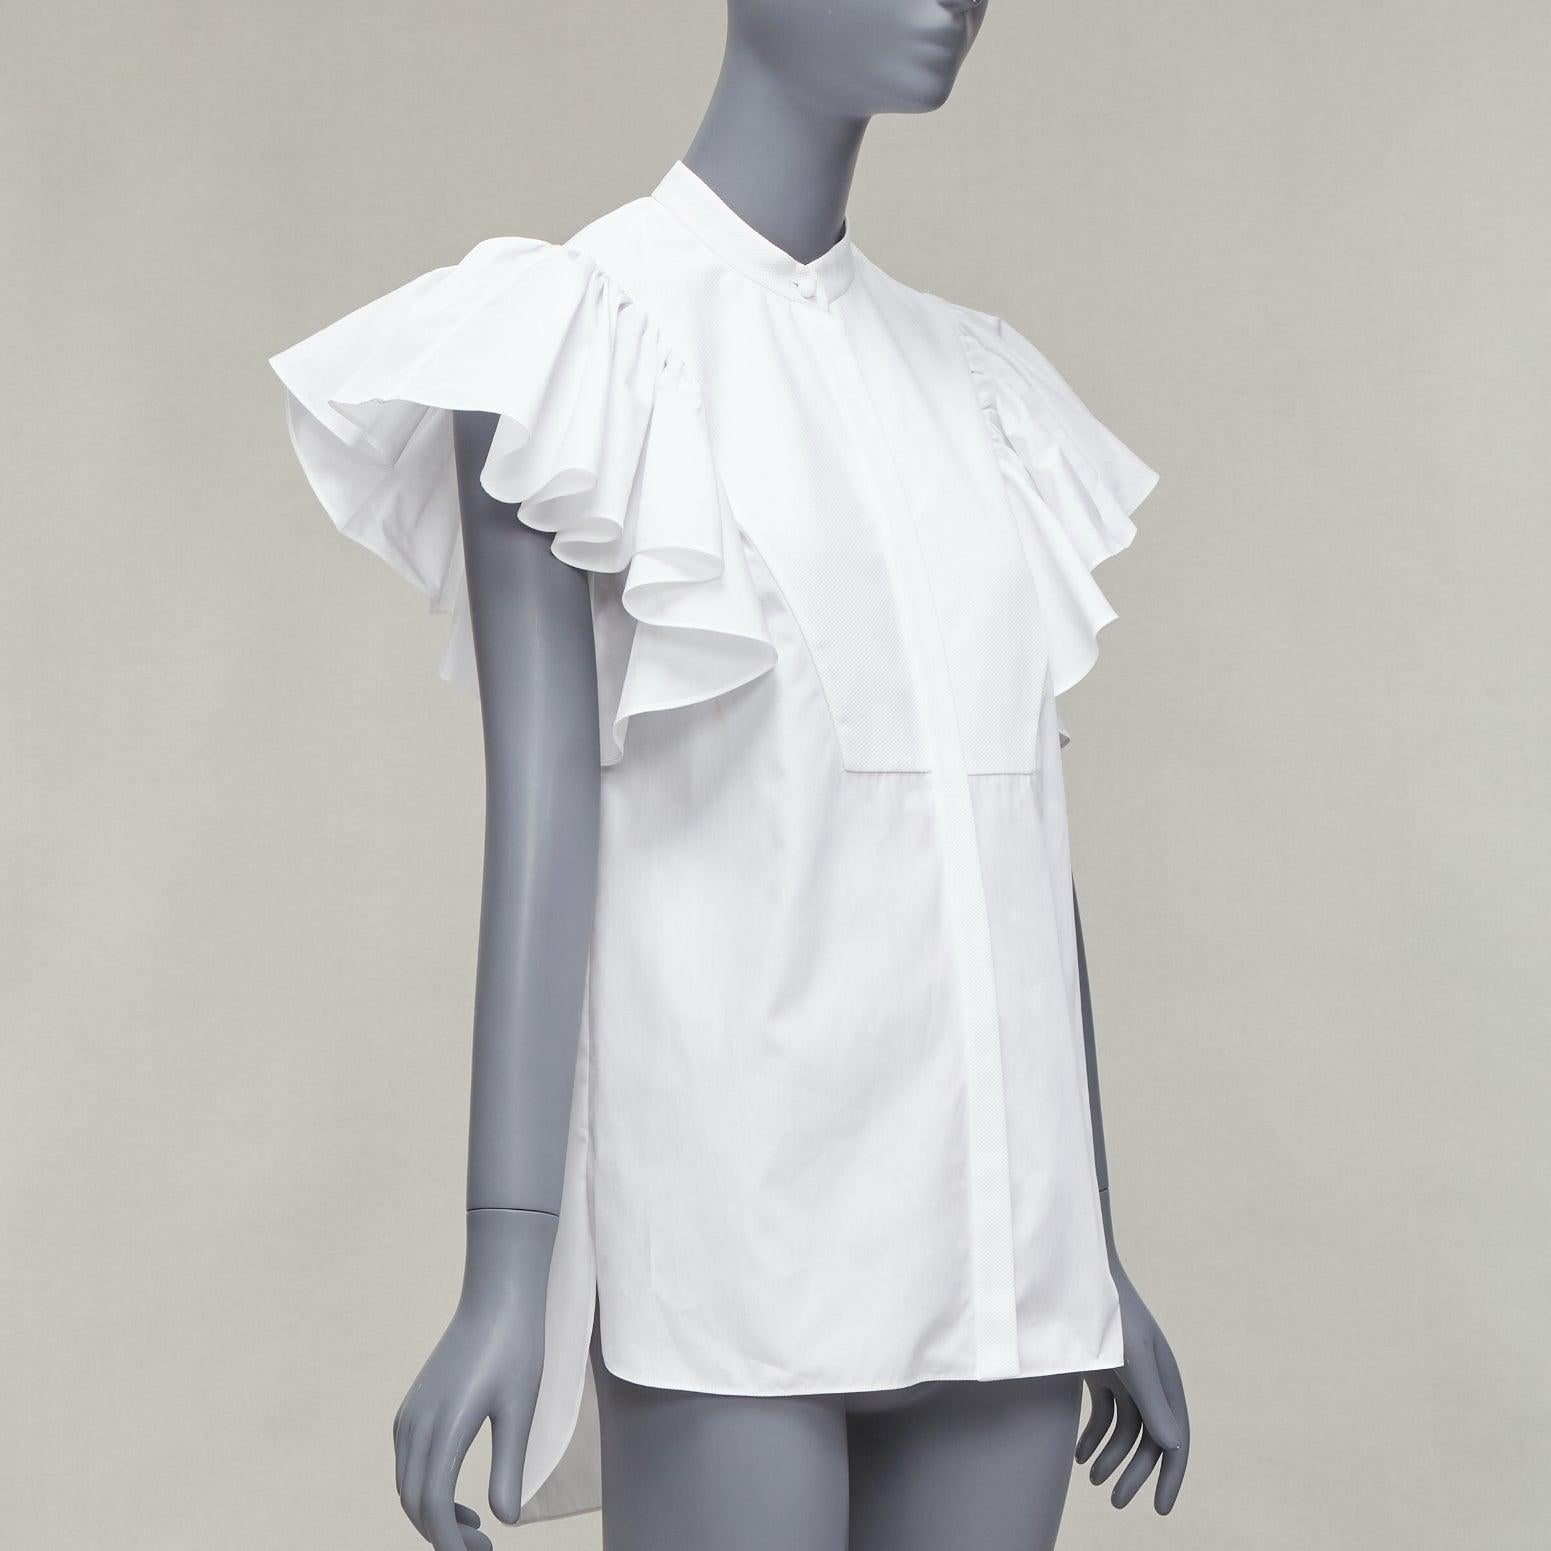 ALEXANDER MCQUEEN white cotton frill sleeve mandarin neck tunic shirt IT38 XS
Reference: AAWC/A01152
Brand: Alexander McQueen
Designer: Sarah Burton
Material: Cotton
Color: White
Pattern: Solid
Closure: Button
Extra Details: Back yoke with inverted